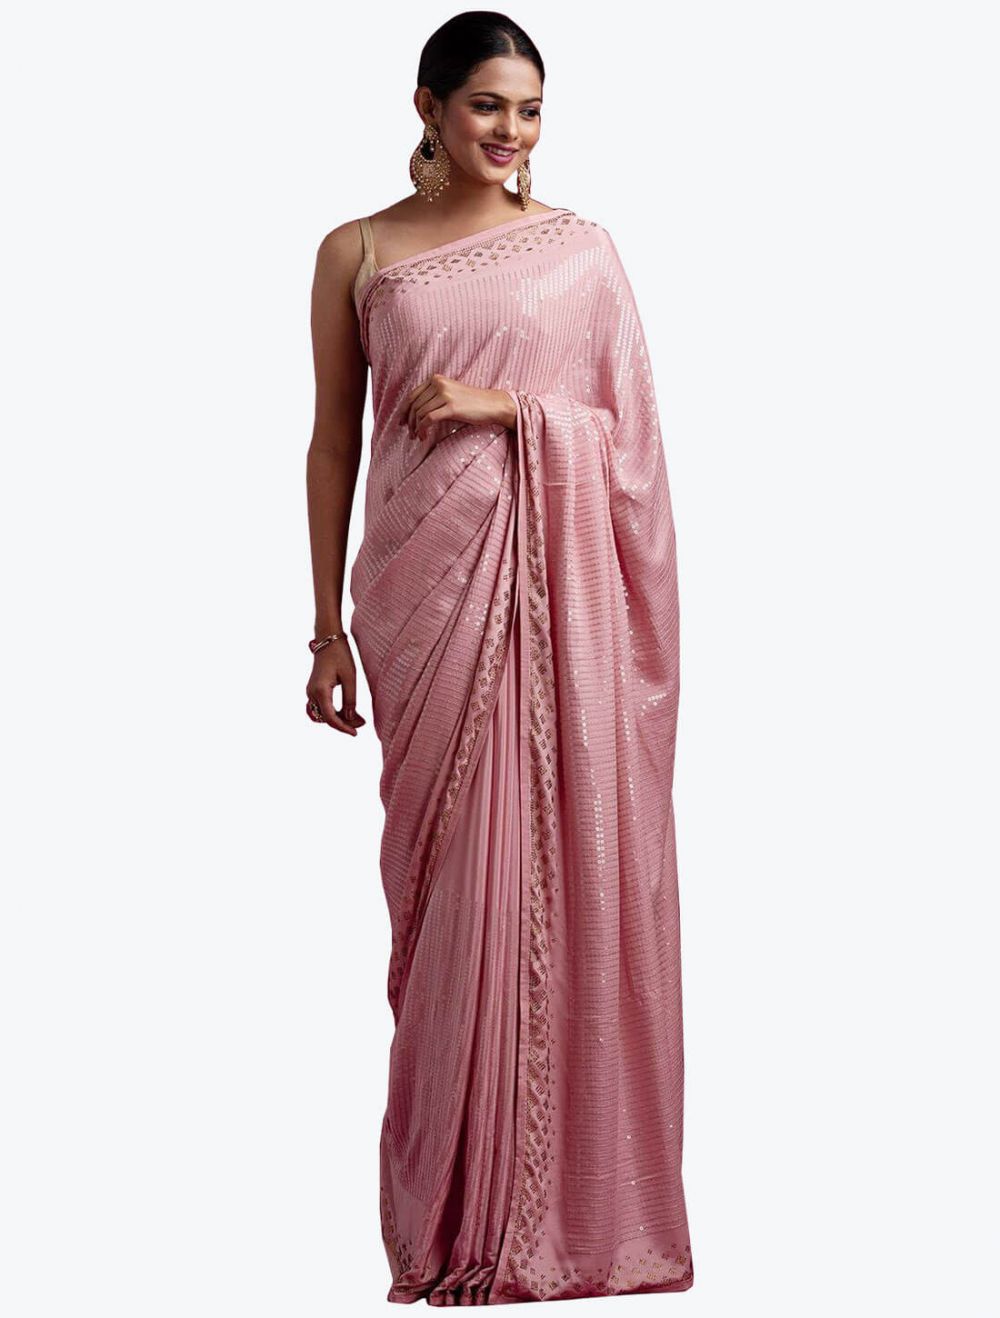 https://fabanza.co.uk/media/catalog/product/cache/c26a0736877cb8c5e2d45478f82a04d0/anishka-creation/202207/onion-pink-fancy-georgette-party-wear-saree-fabsa21802.jpg